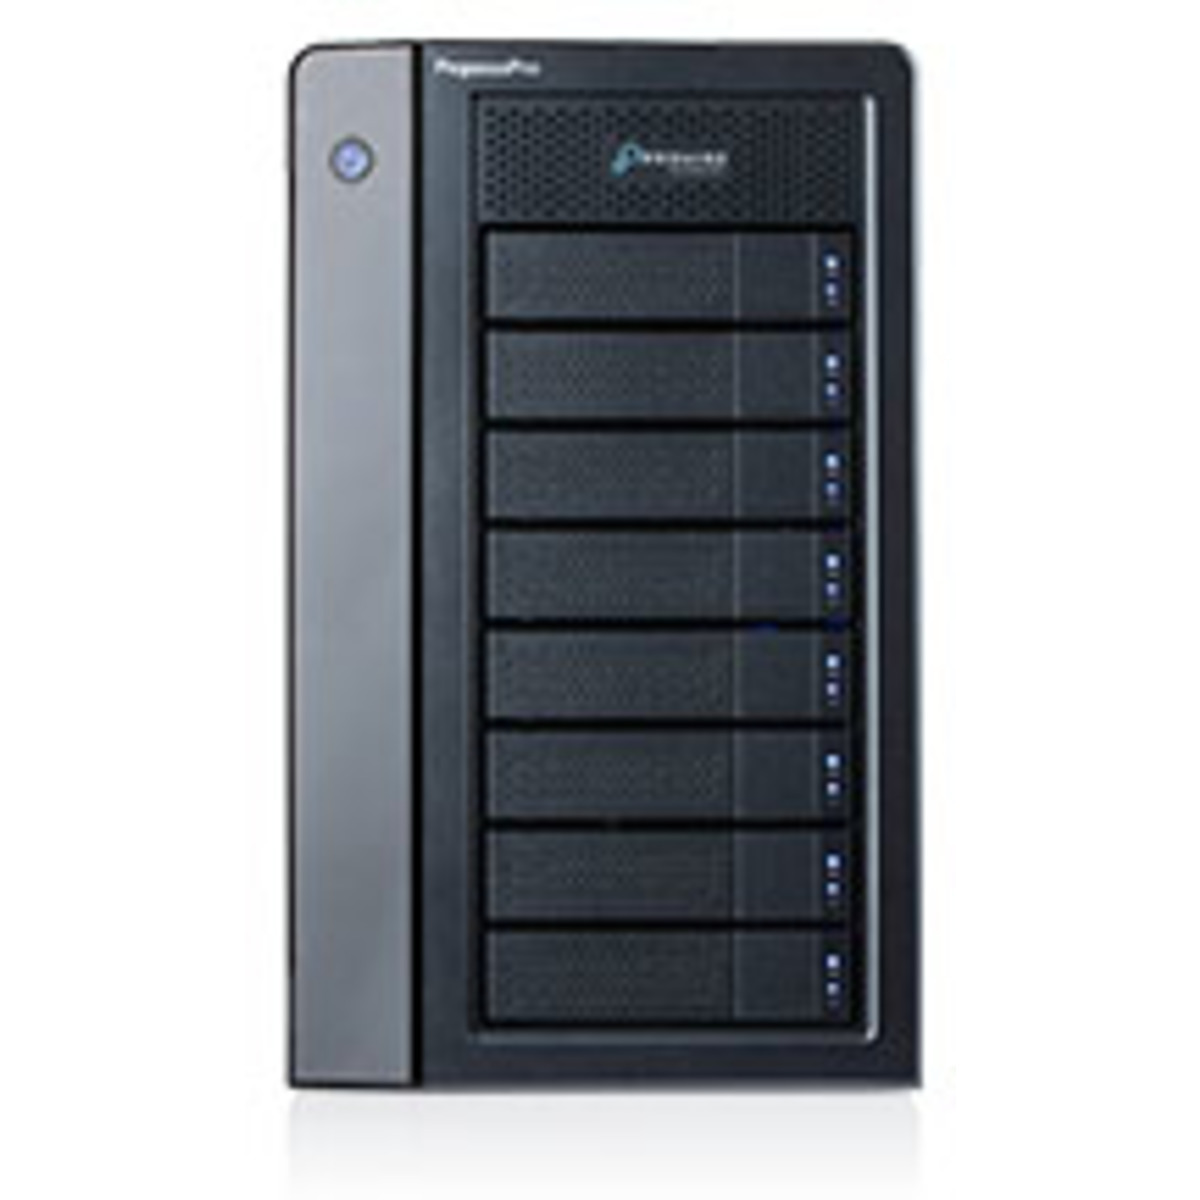 buy Promise Technology PegasusPro R8 Desktop DAS-NAS - Combo Direct + Network Storage Device Burn-In Tested Configurations - nas headquarters buy network attached storage server device das new raid-5 free shipping usa PegasusPro R8